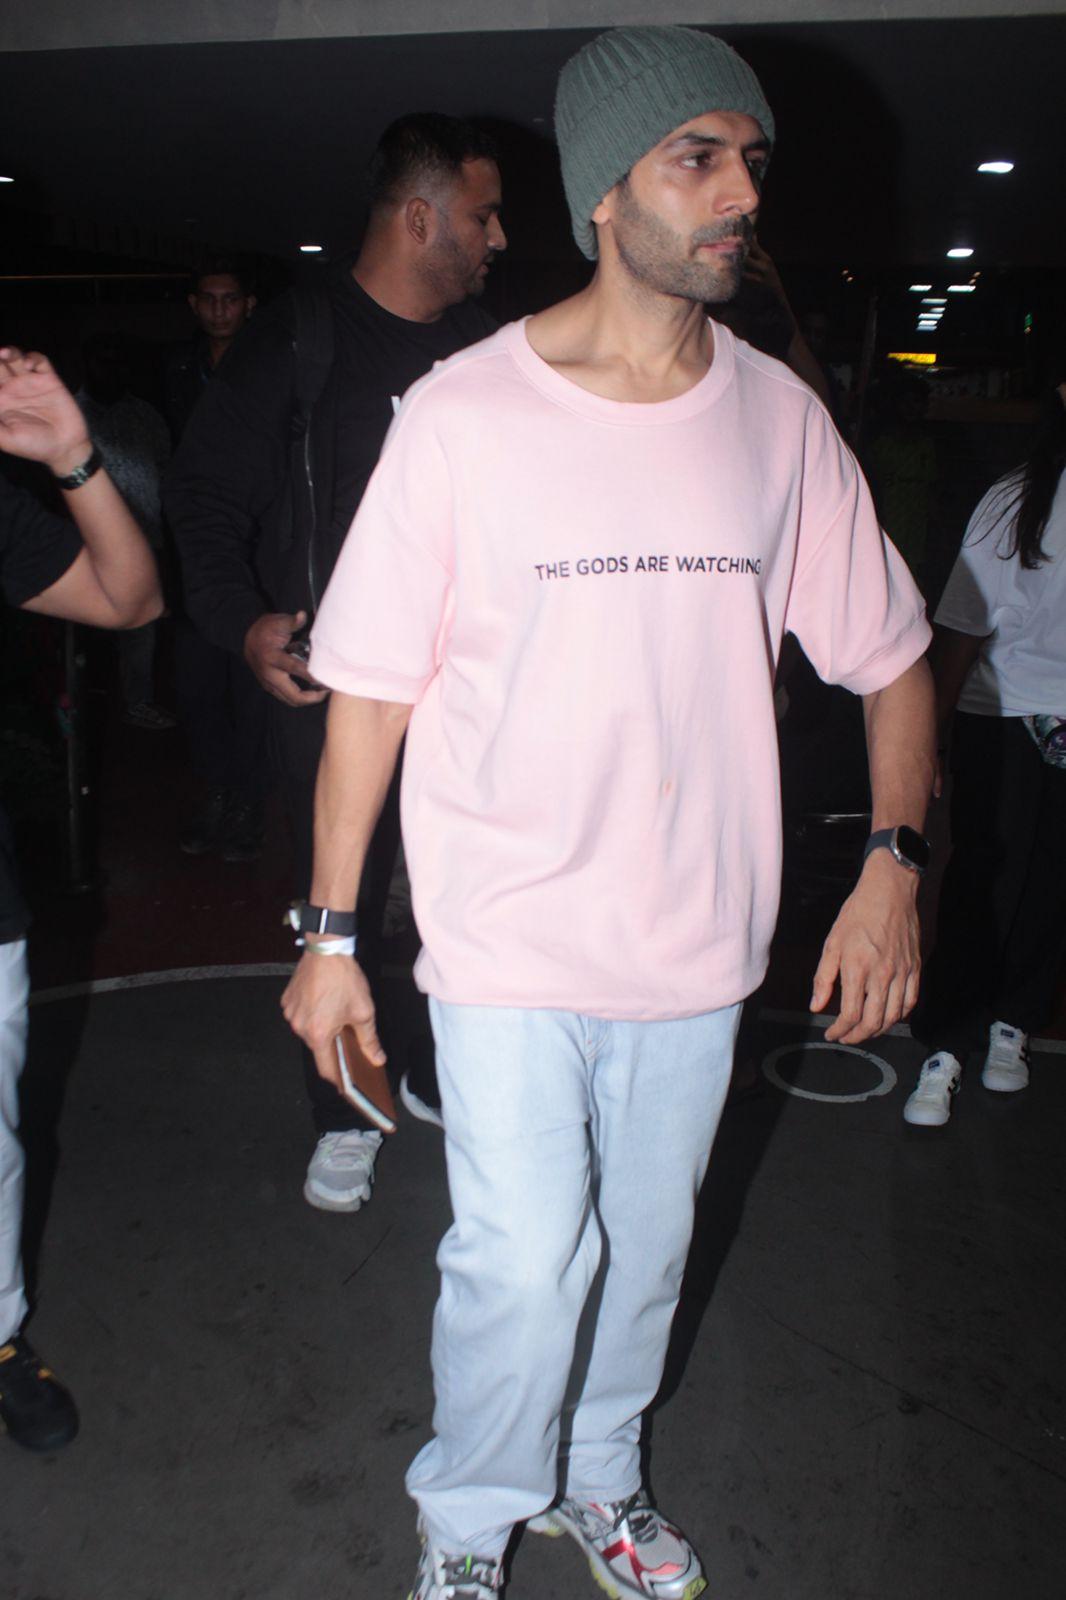 Kartik Aaryan opted for a casual and comfy outfit as he went out in the city